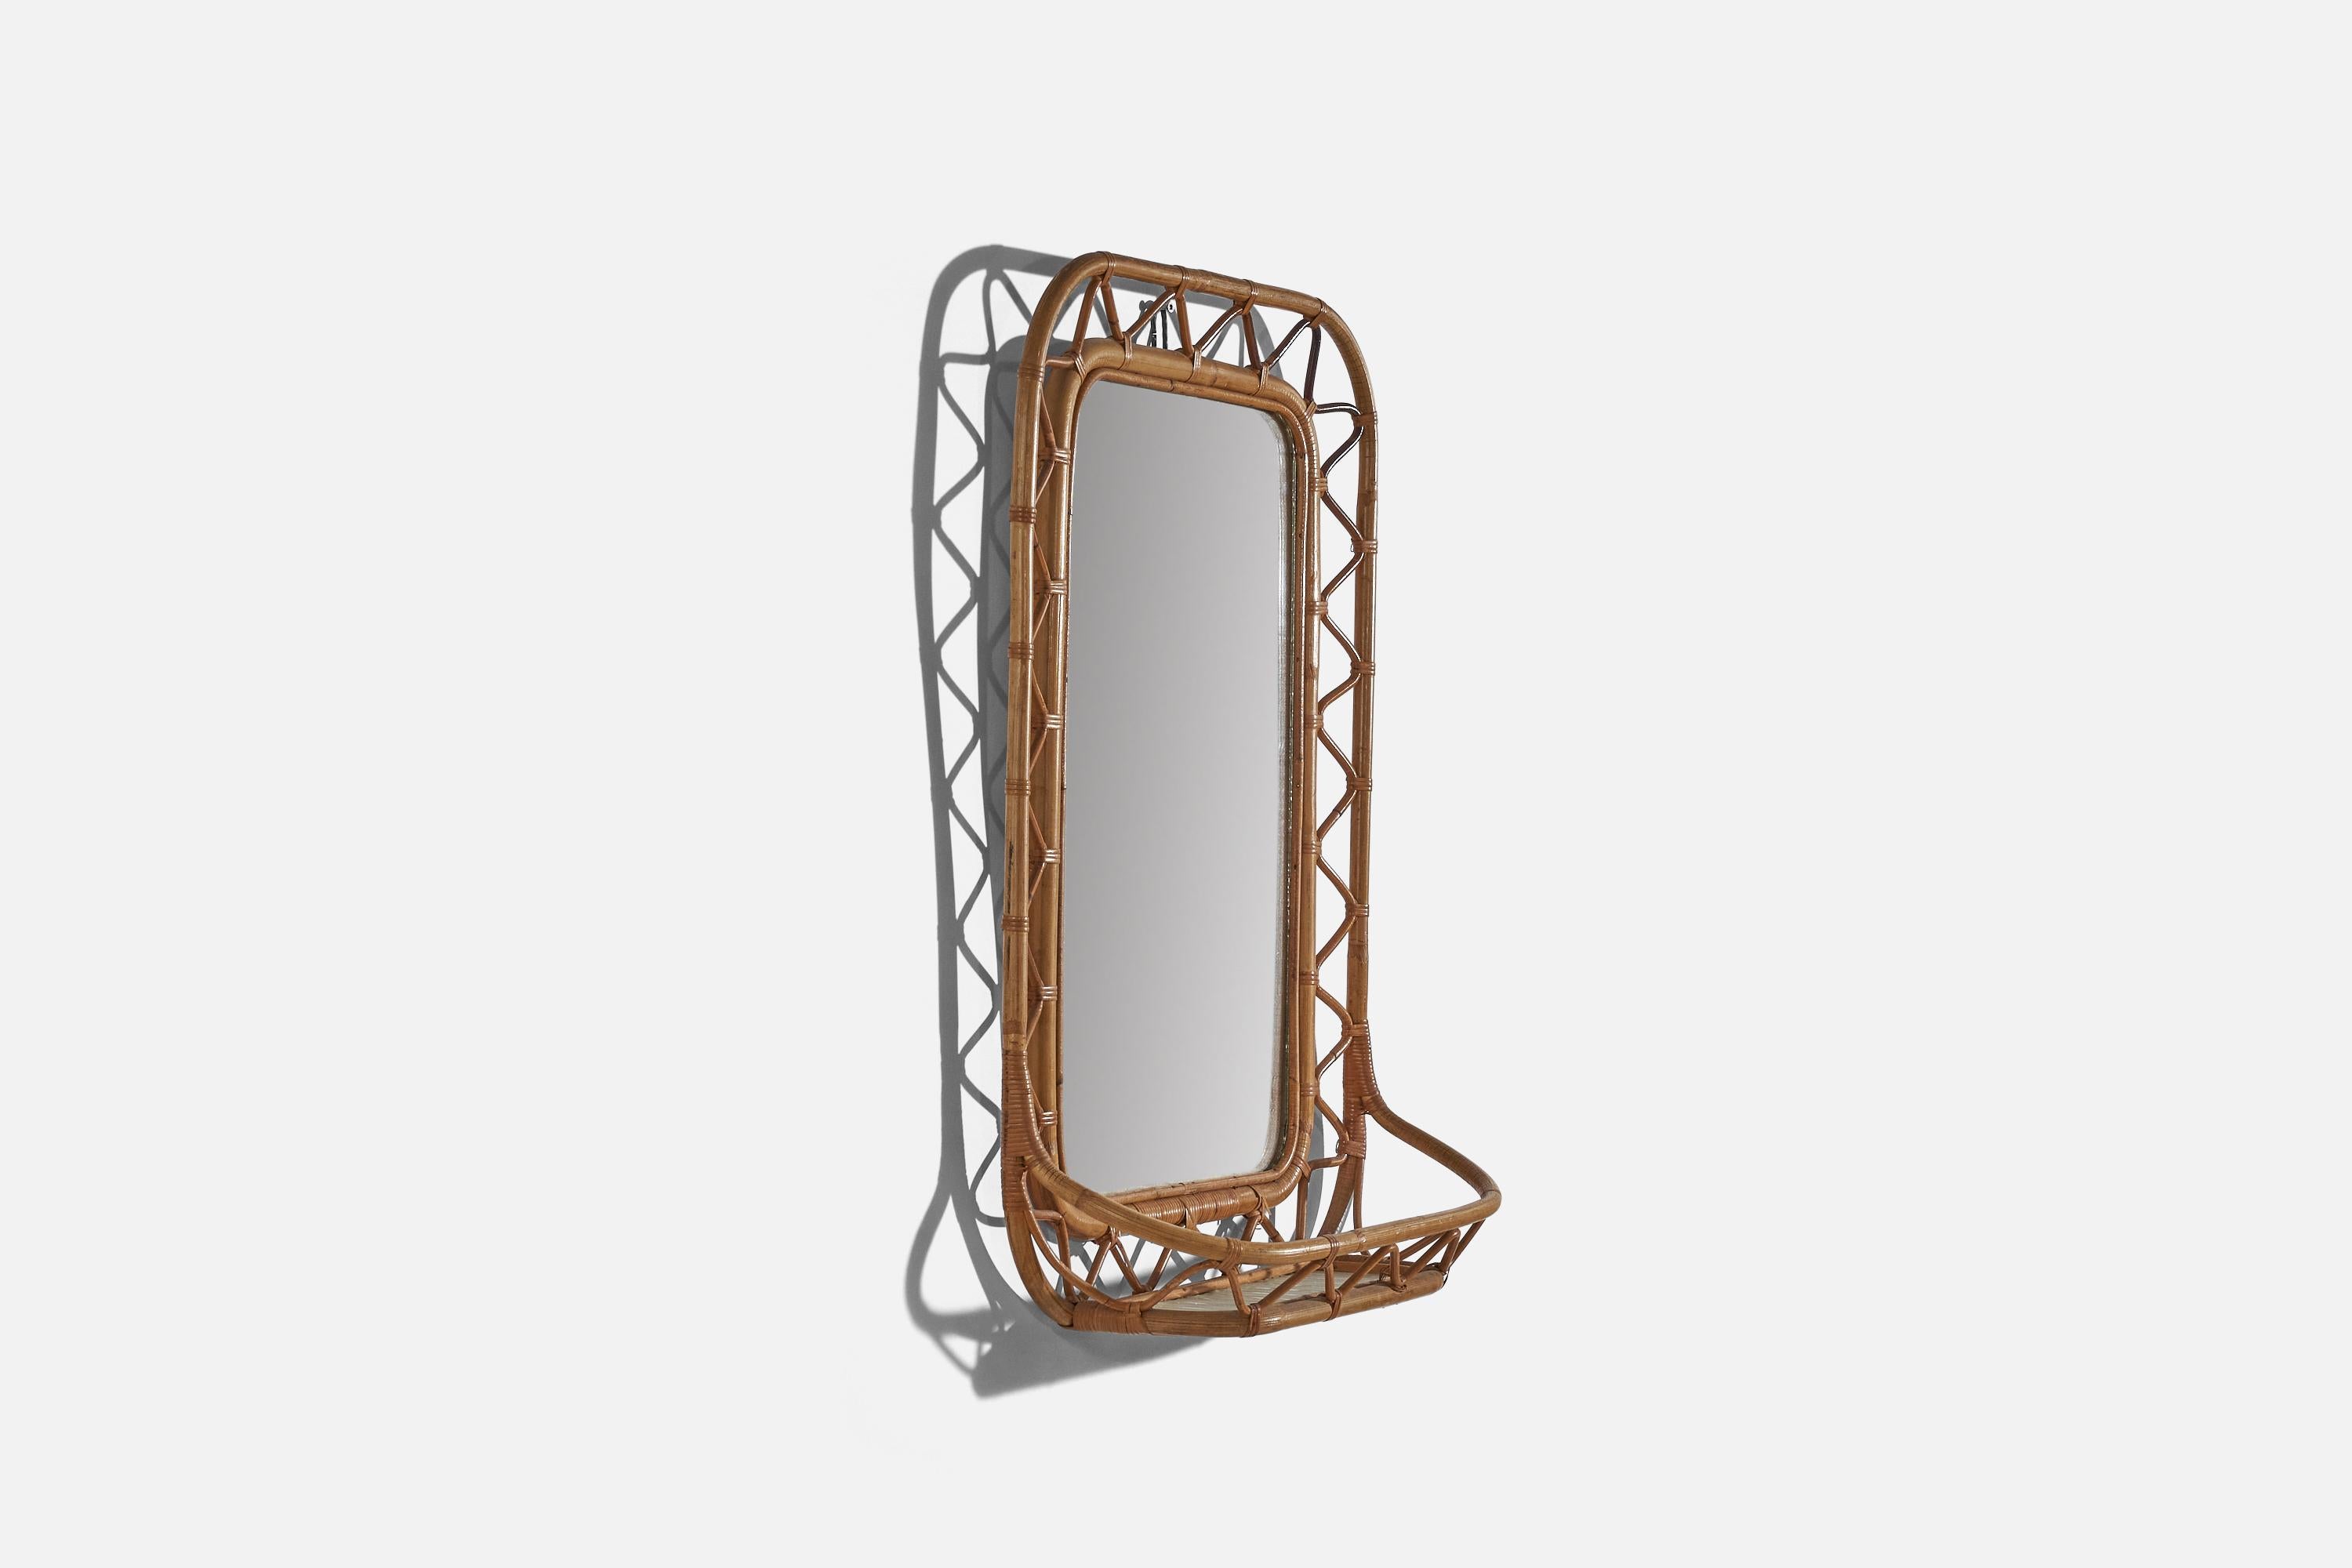 A bamboo and rattan wall mirror with shelf, designed and produced in Sweden, 1960s.